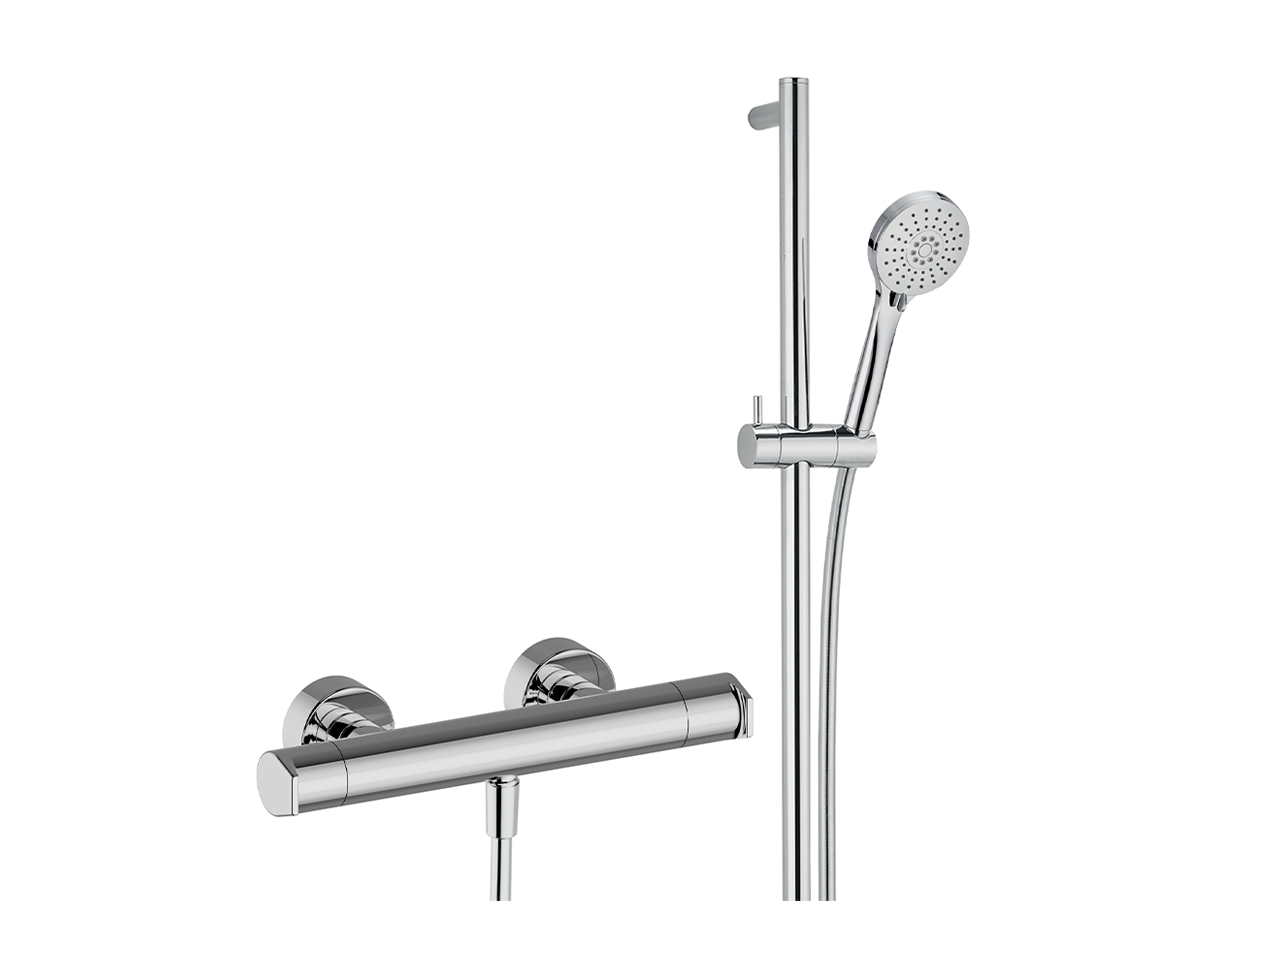 CisalThermostatic shower mixer with sliding bar ROCK&ROLL_RKS01010